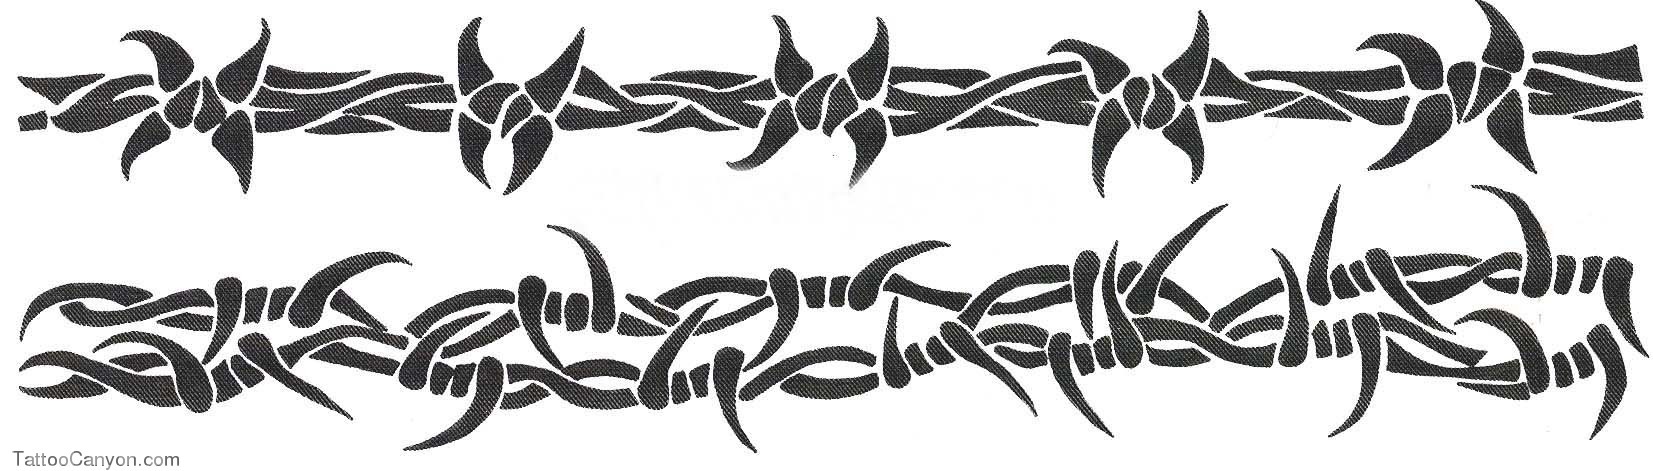 Outline Barbed Wire Tattoo Design